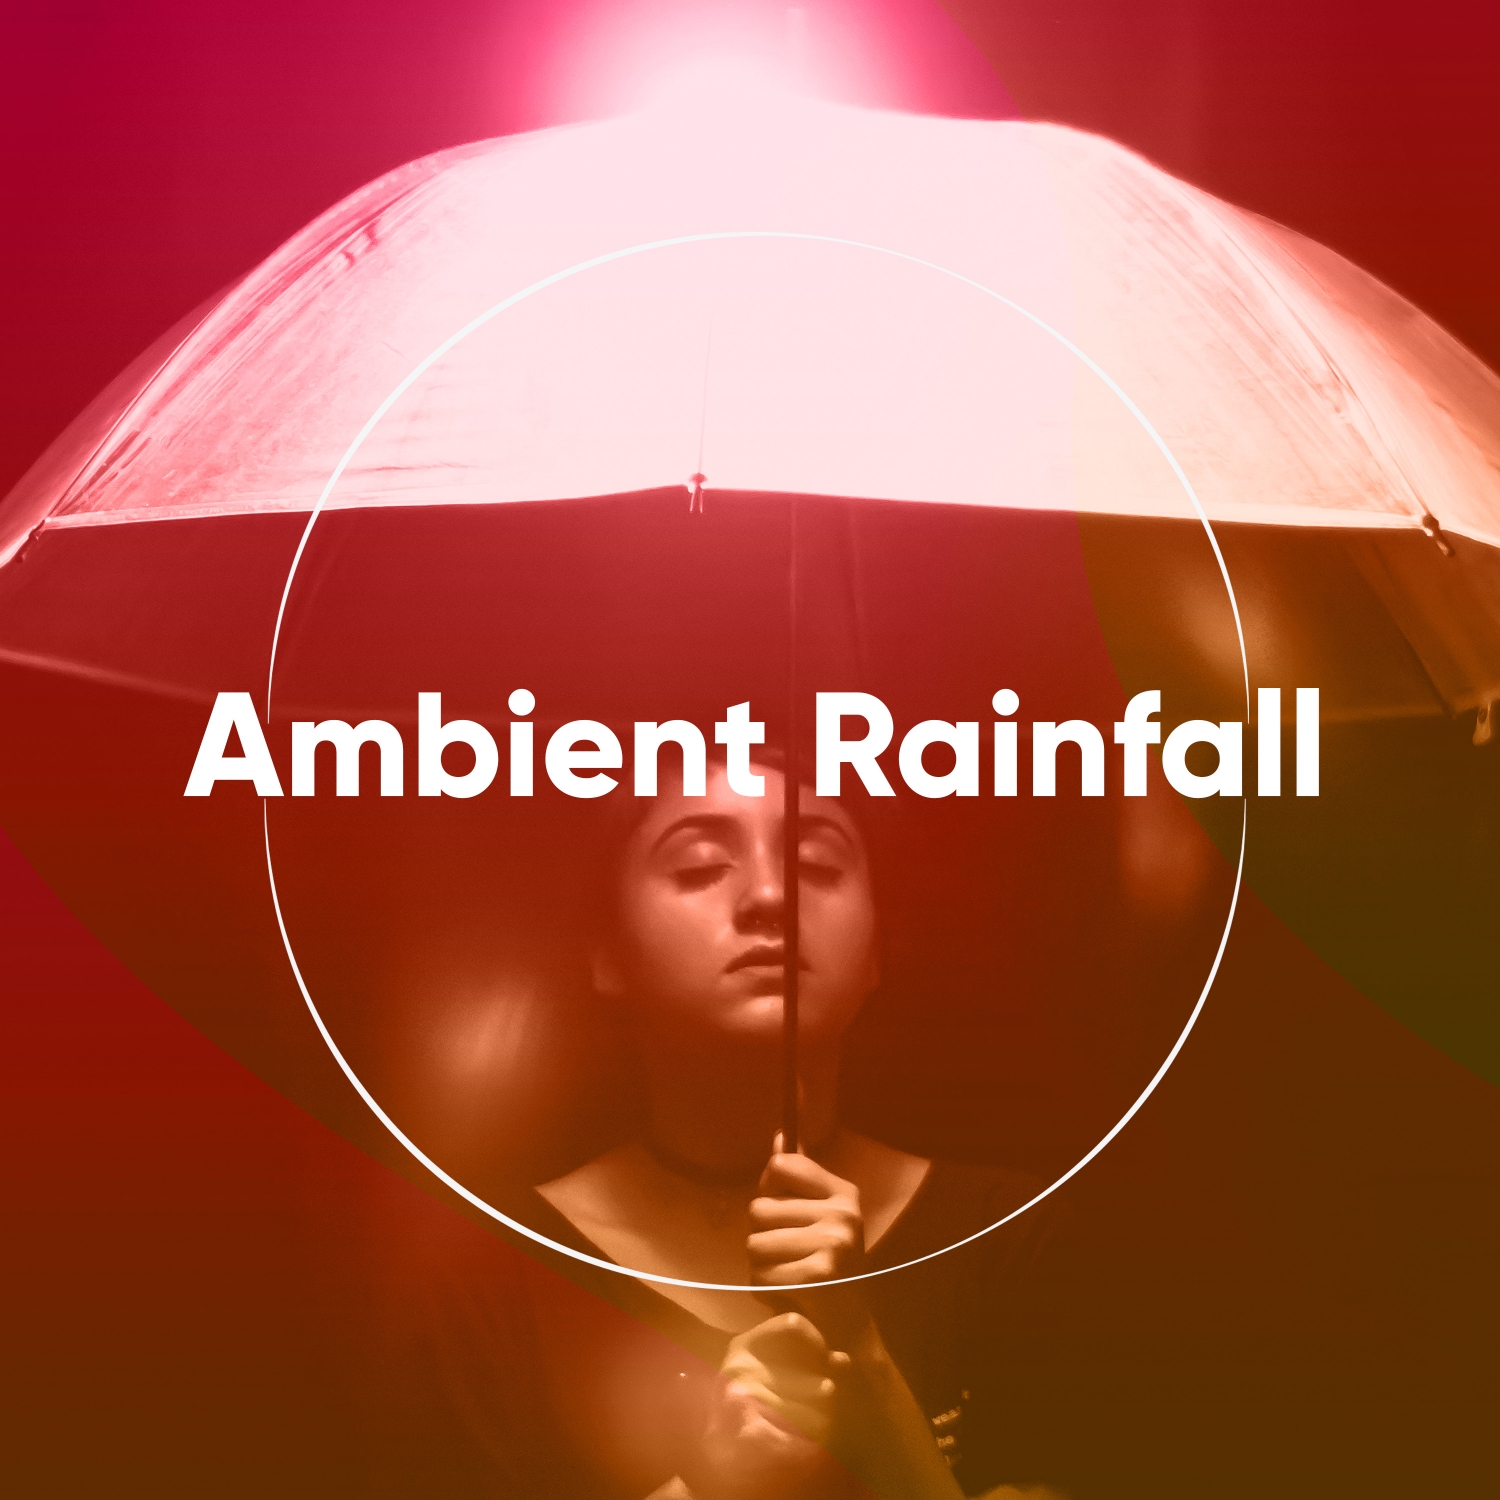 19 Meditation Relaxation Sounds -Natural and Ambient Rainfall